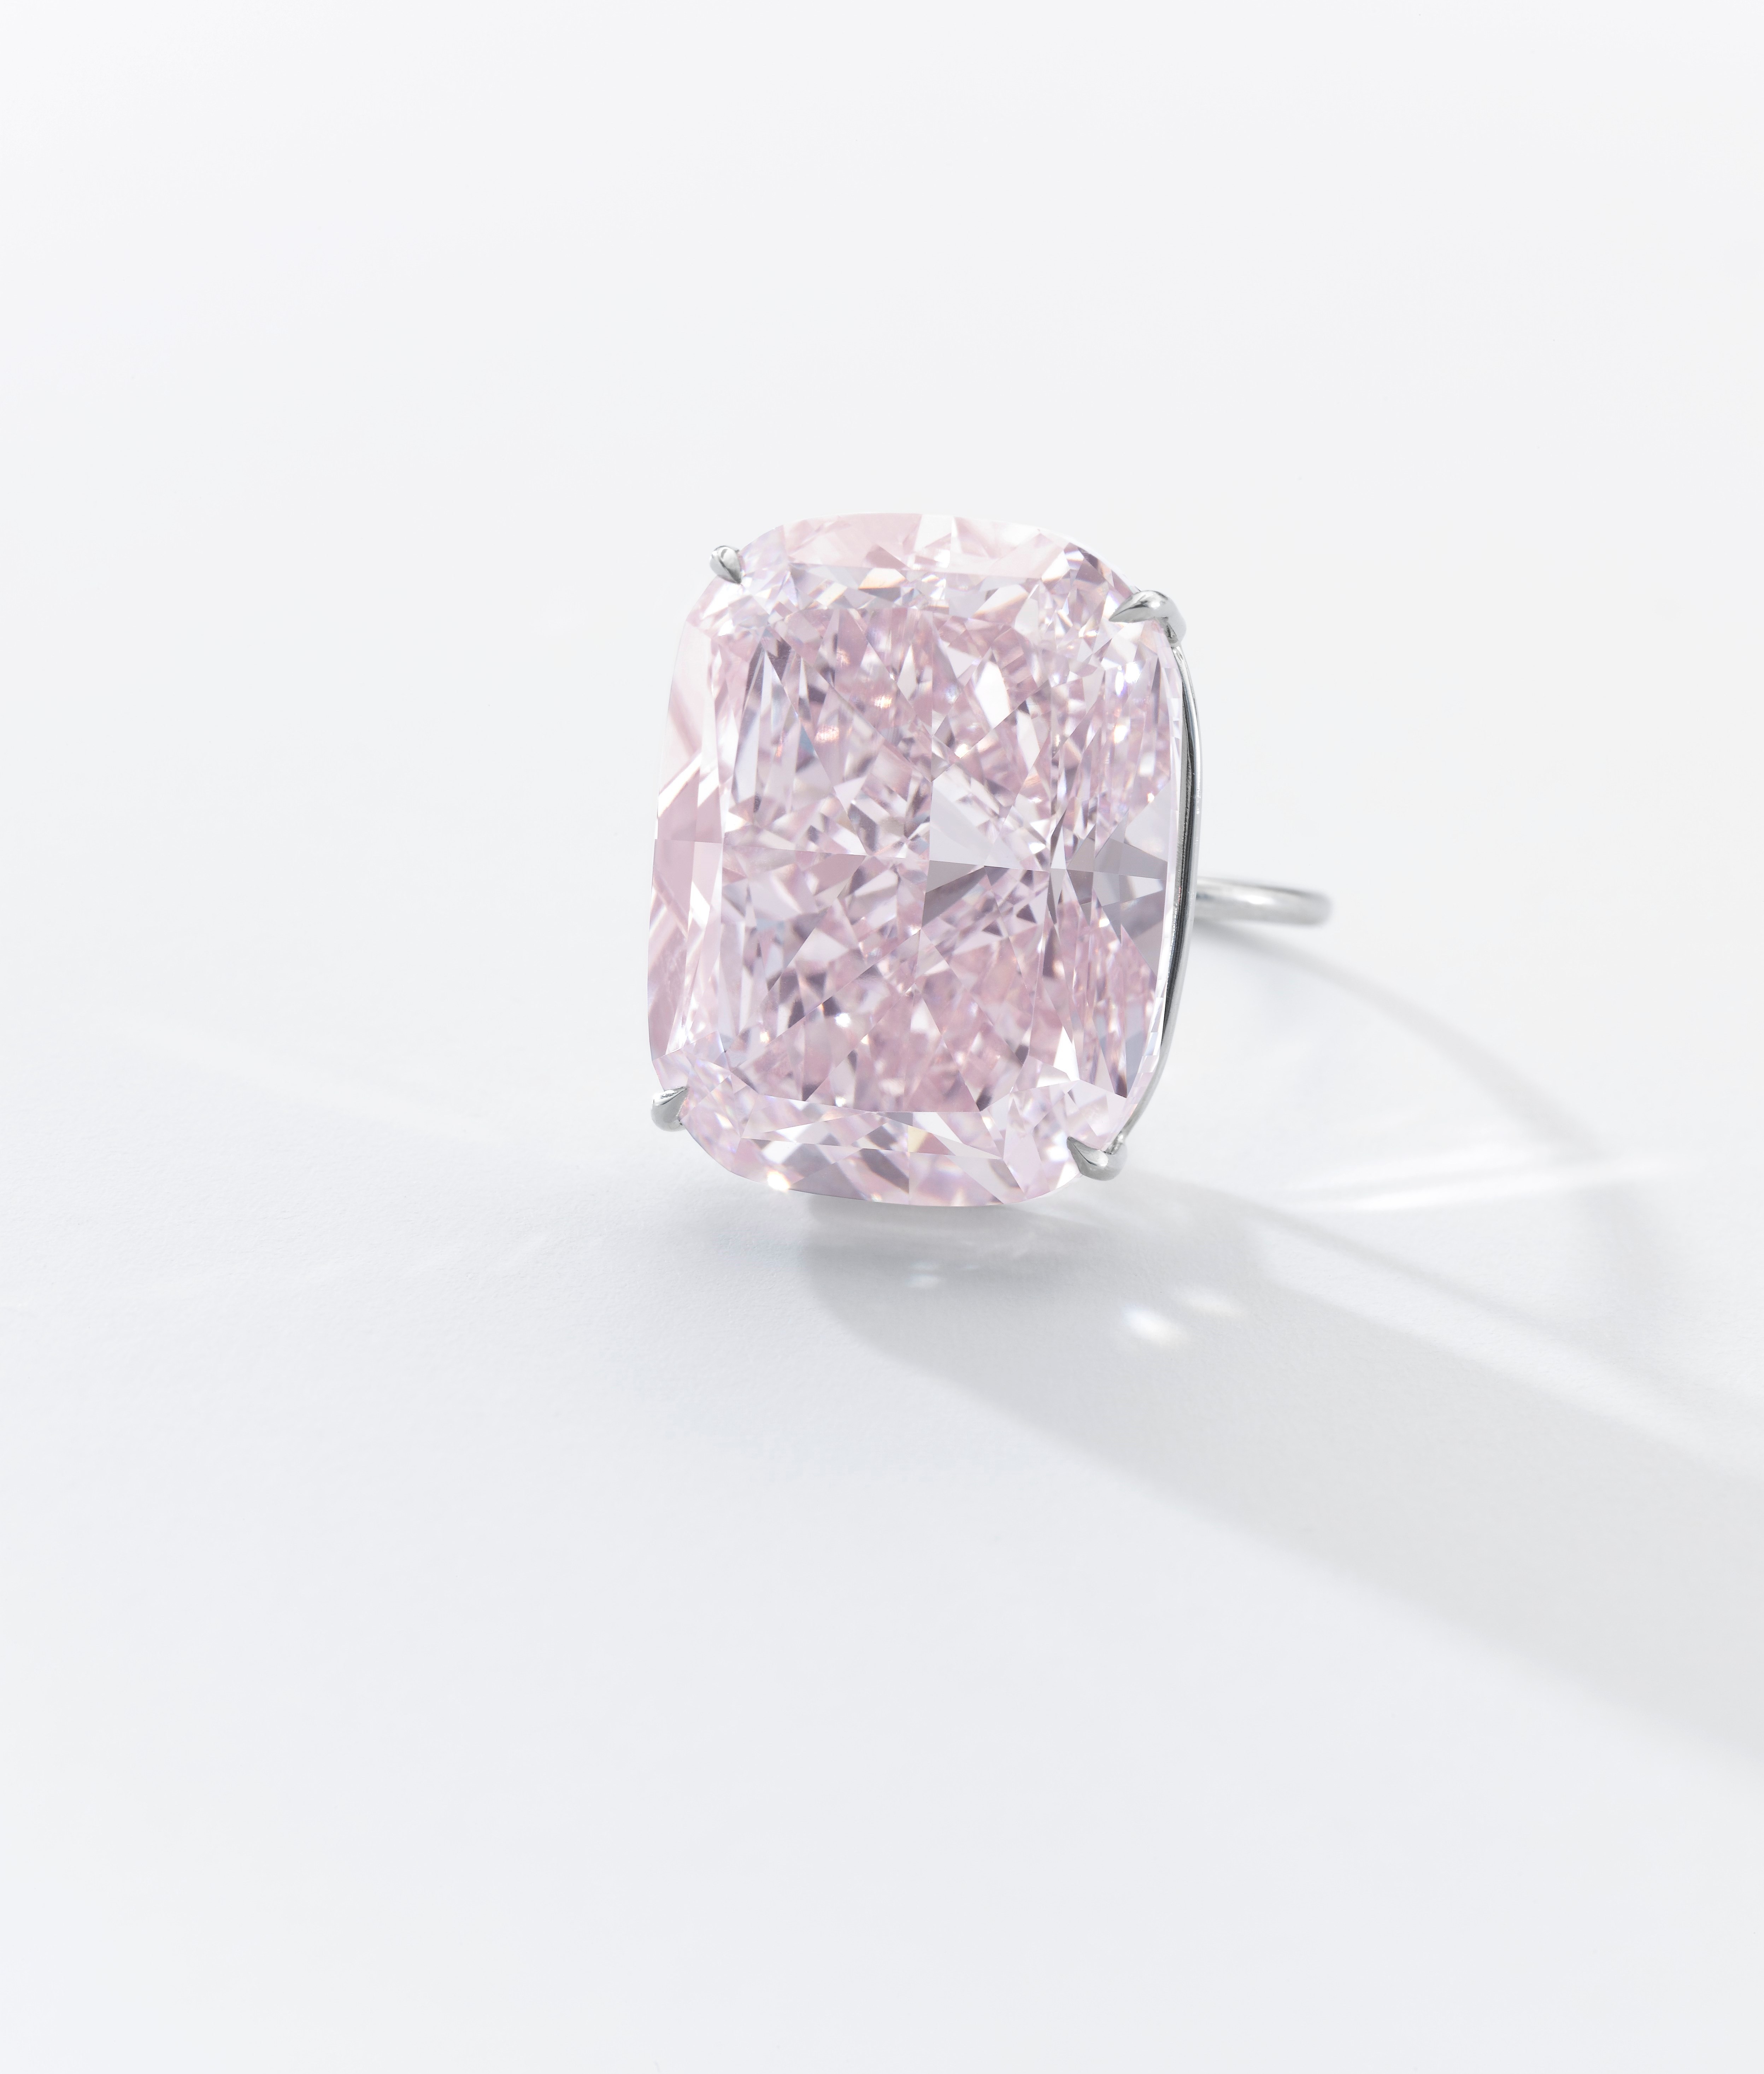 ‘The Raj Pink’ will be auctioned at Sotheby’s sale of Magnificent Jewels and Noble Jewels in Geneva on November 15.